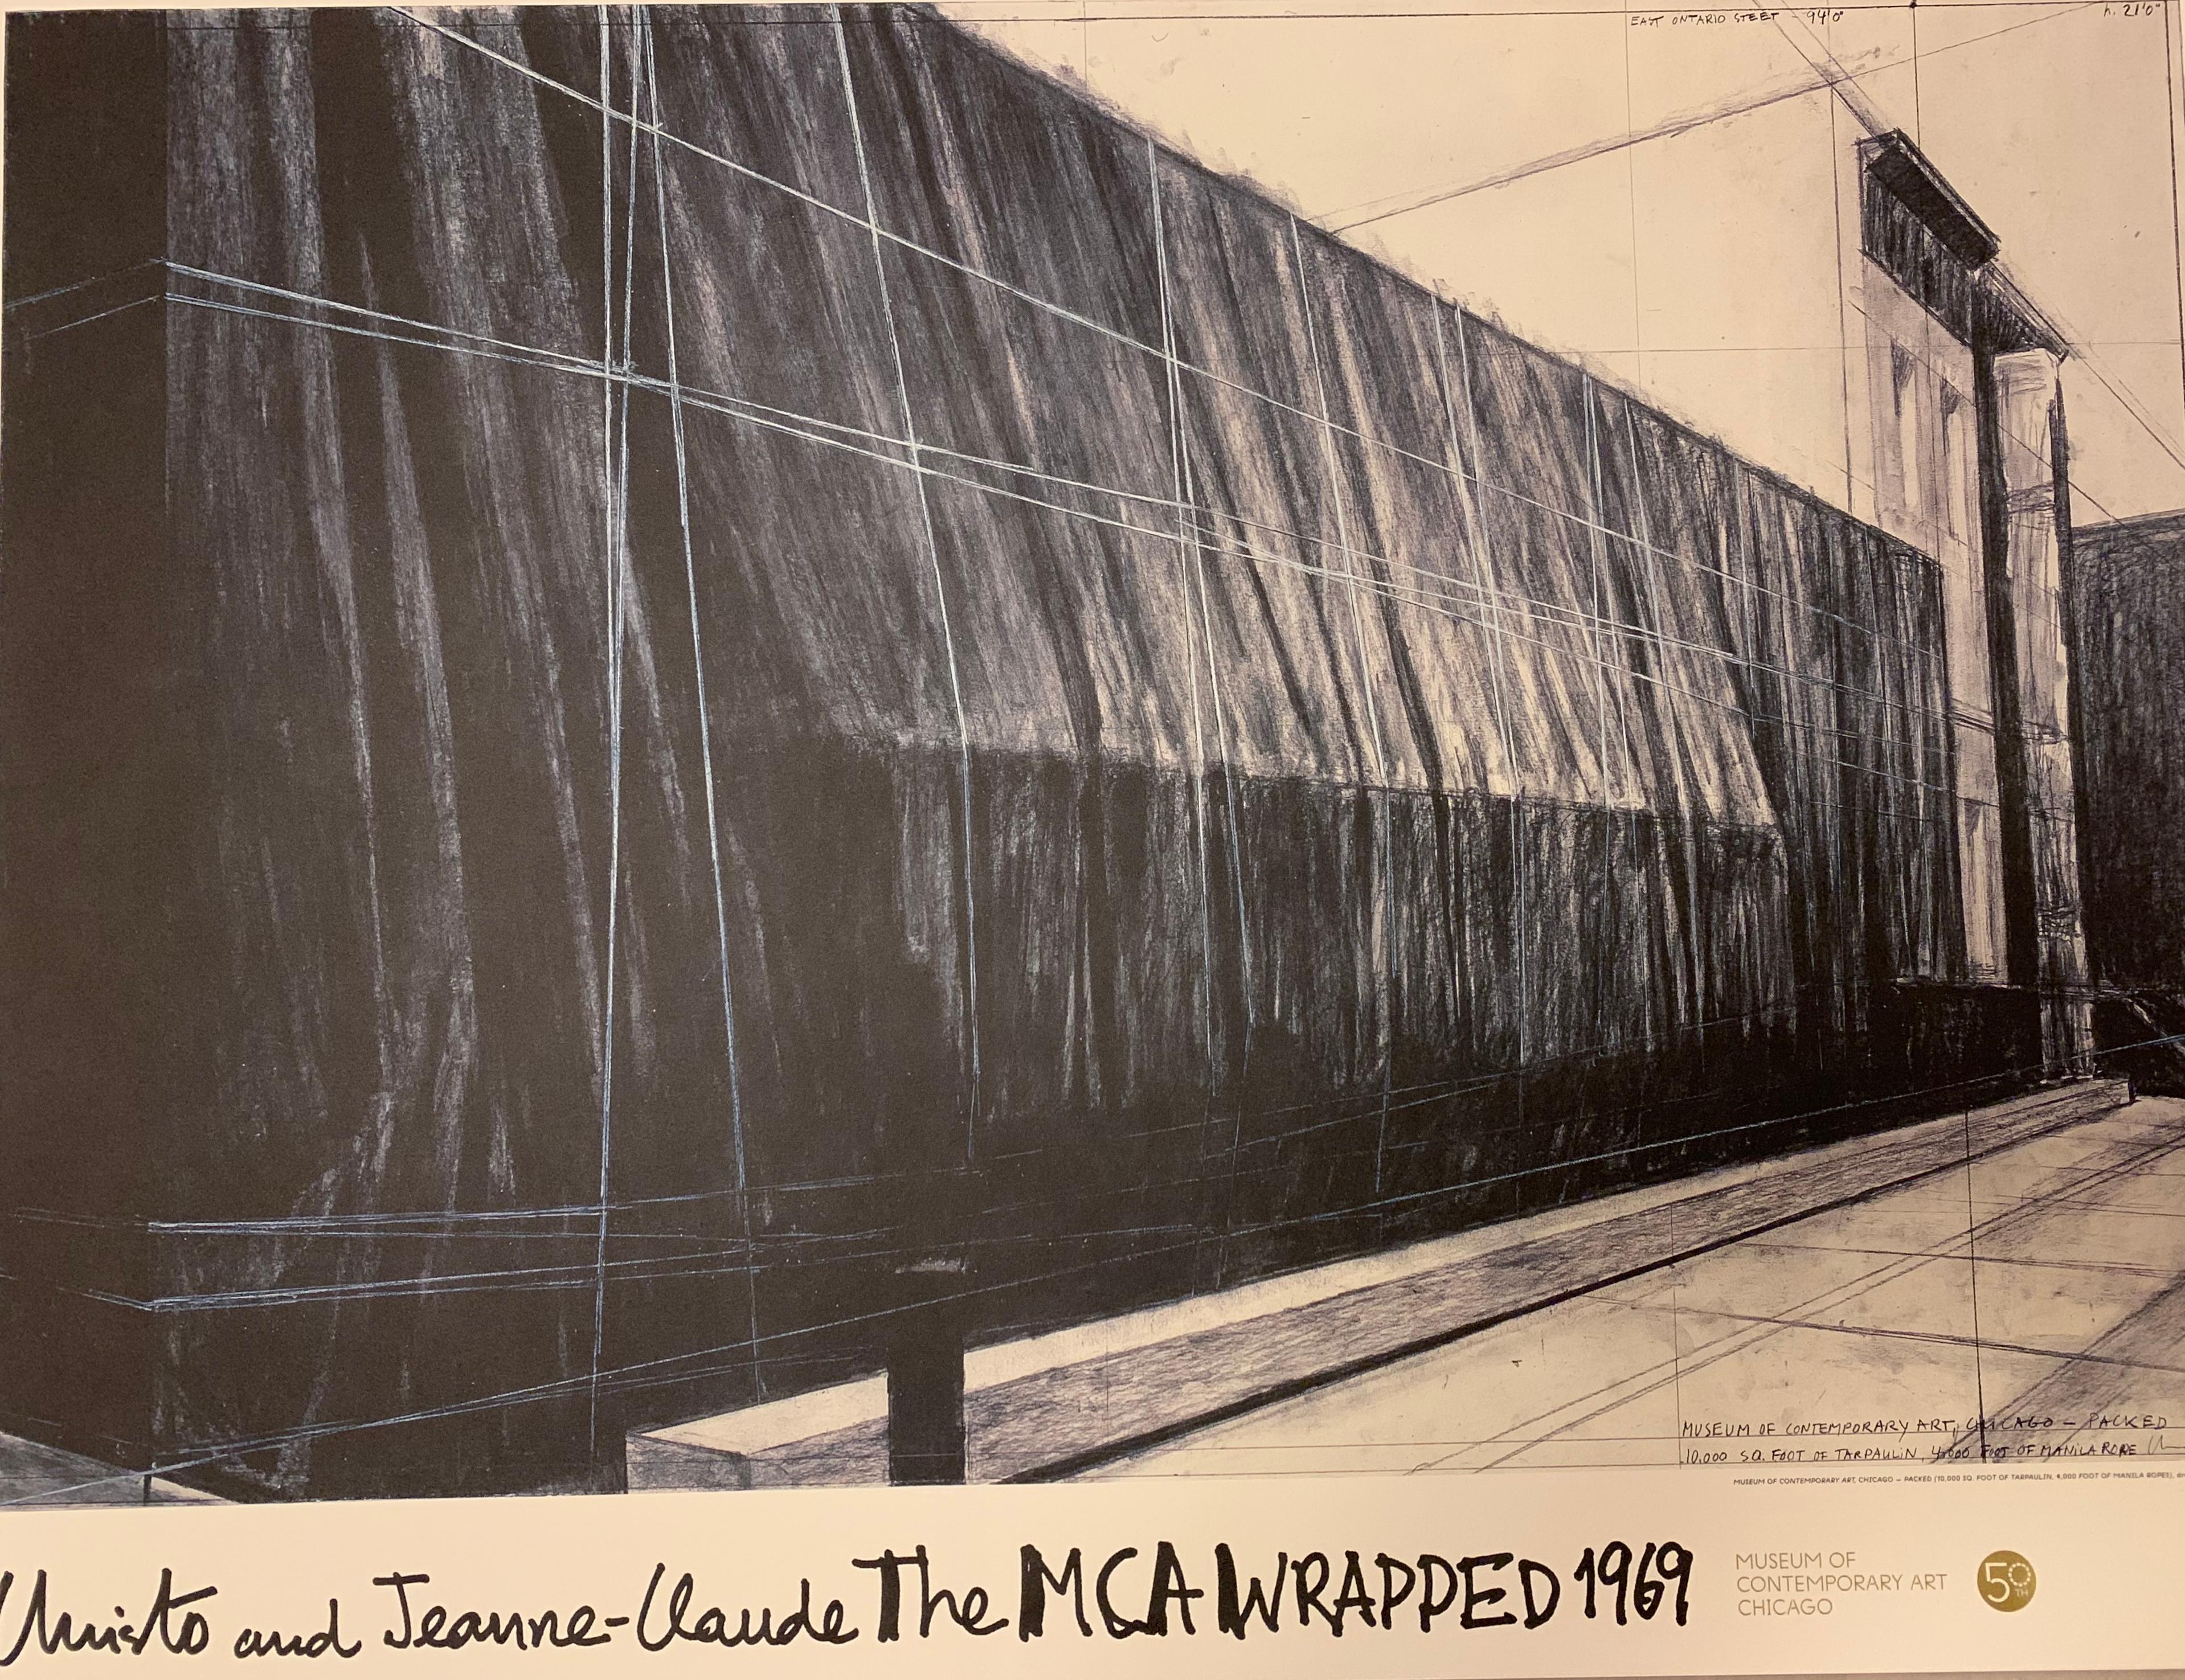 Own a piece of history with this rare and limited edition poster from the MCA! Commemorating Christo's iconic exhibition 